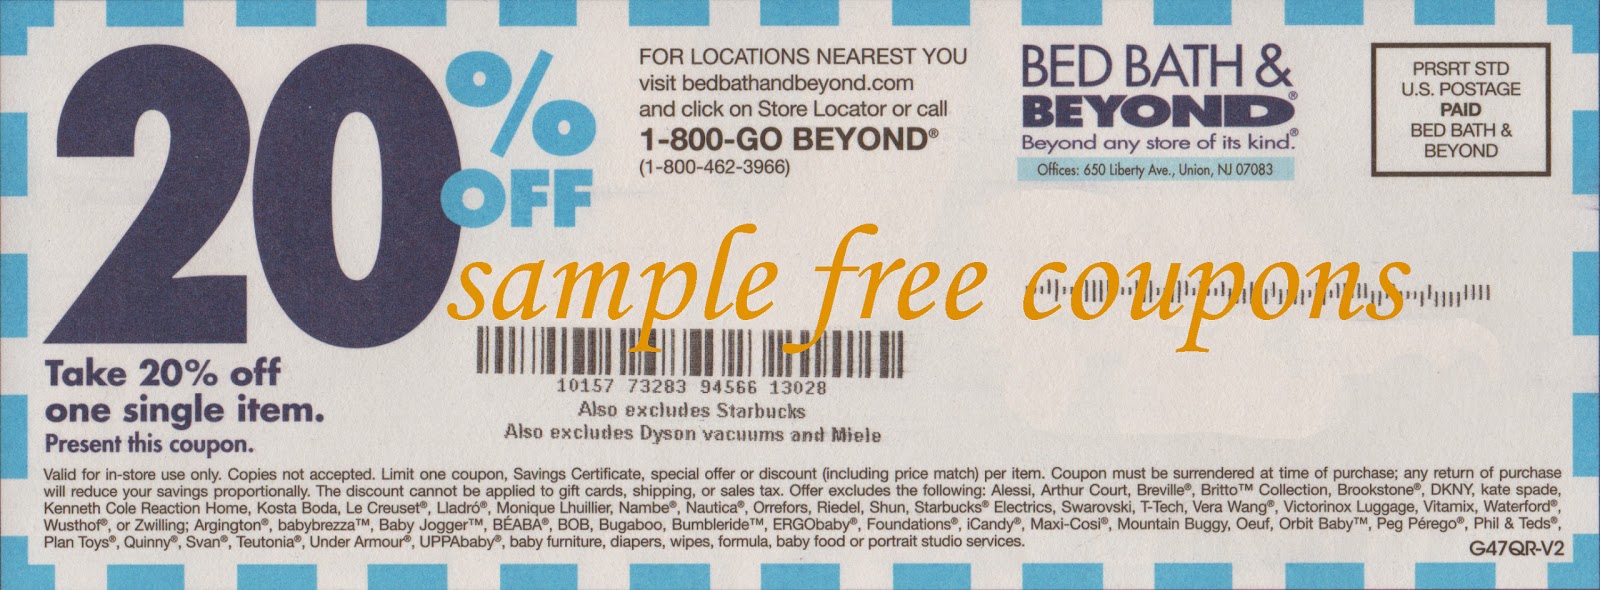 michaels coupons april 2014 more printable michaels coupons you must ...